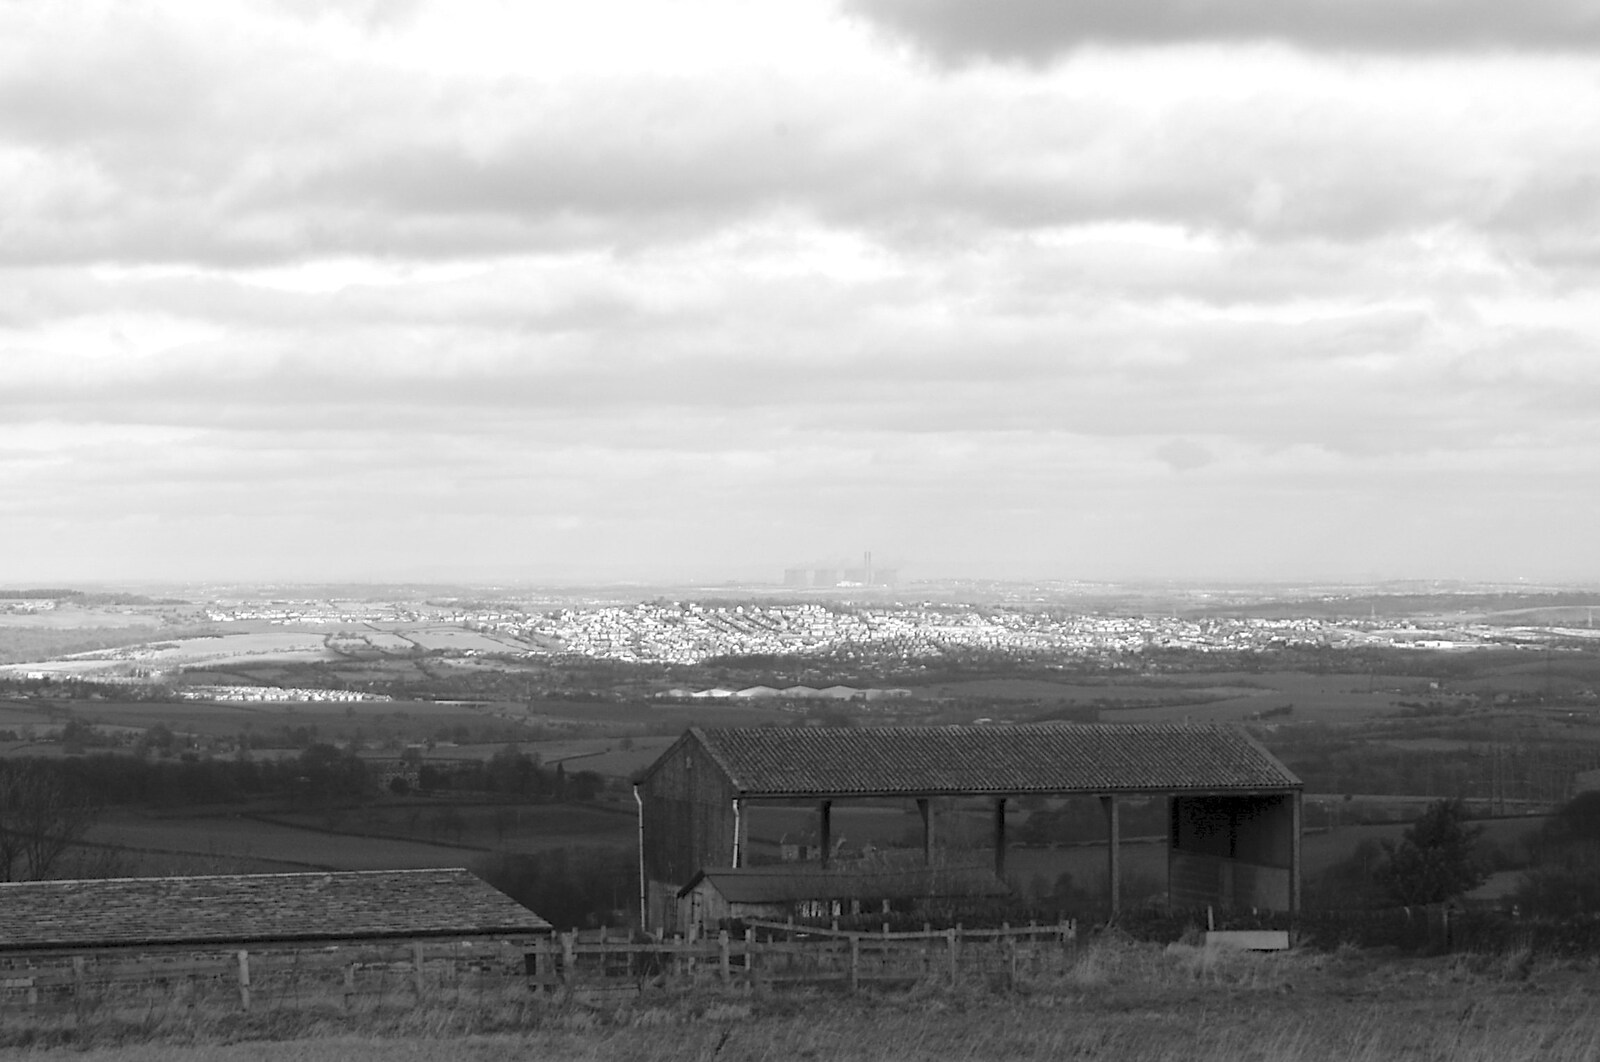 Ferrybridge power station is visible in the distance from The Old Man's 70th Birthday, Pontefract, West Yorkshire - 29th January 2005